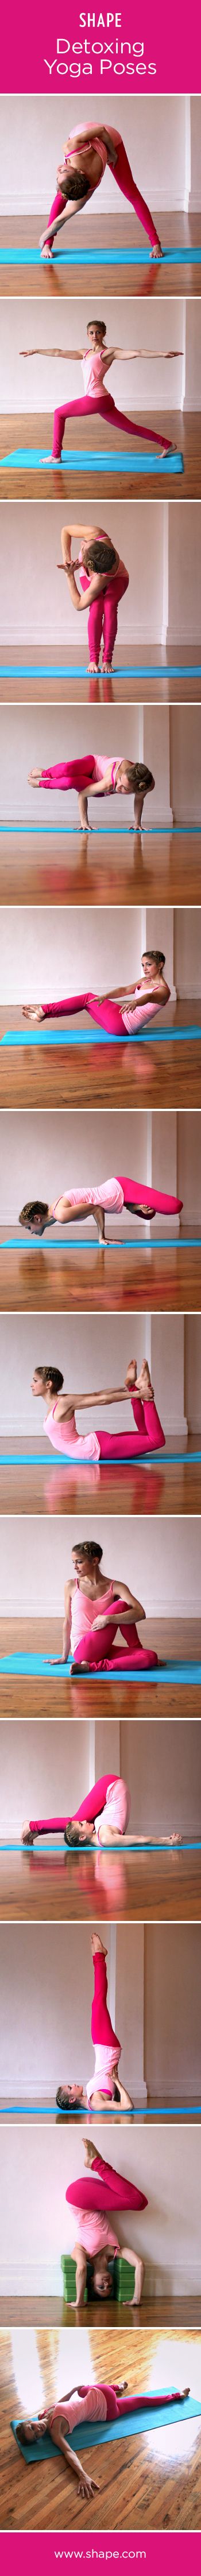 Your spring #yoga cleanse in 12 easy poses. via shape.com